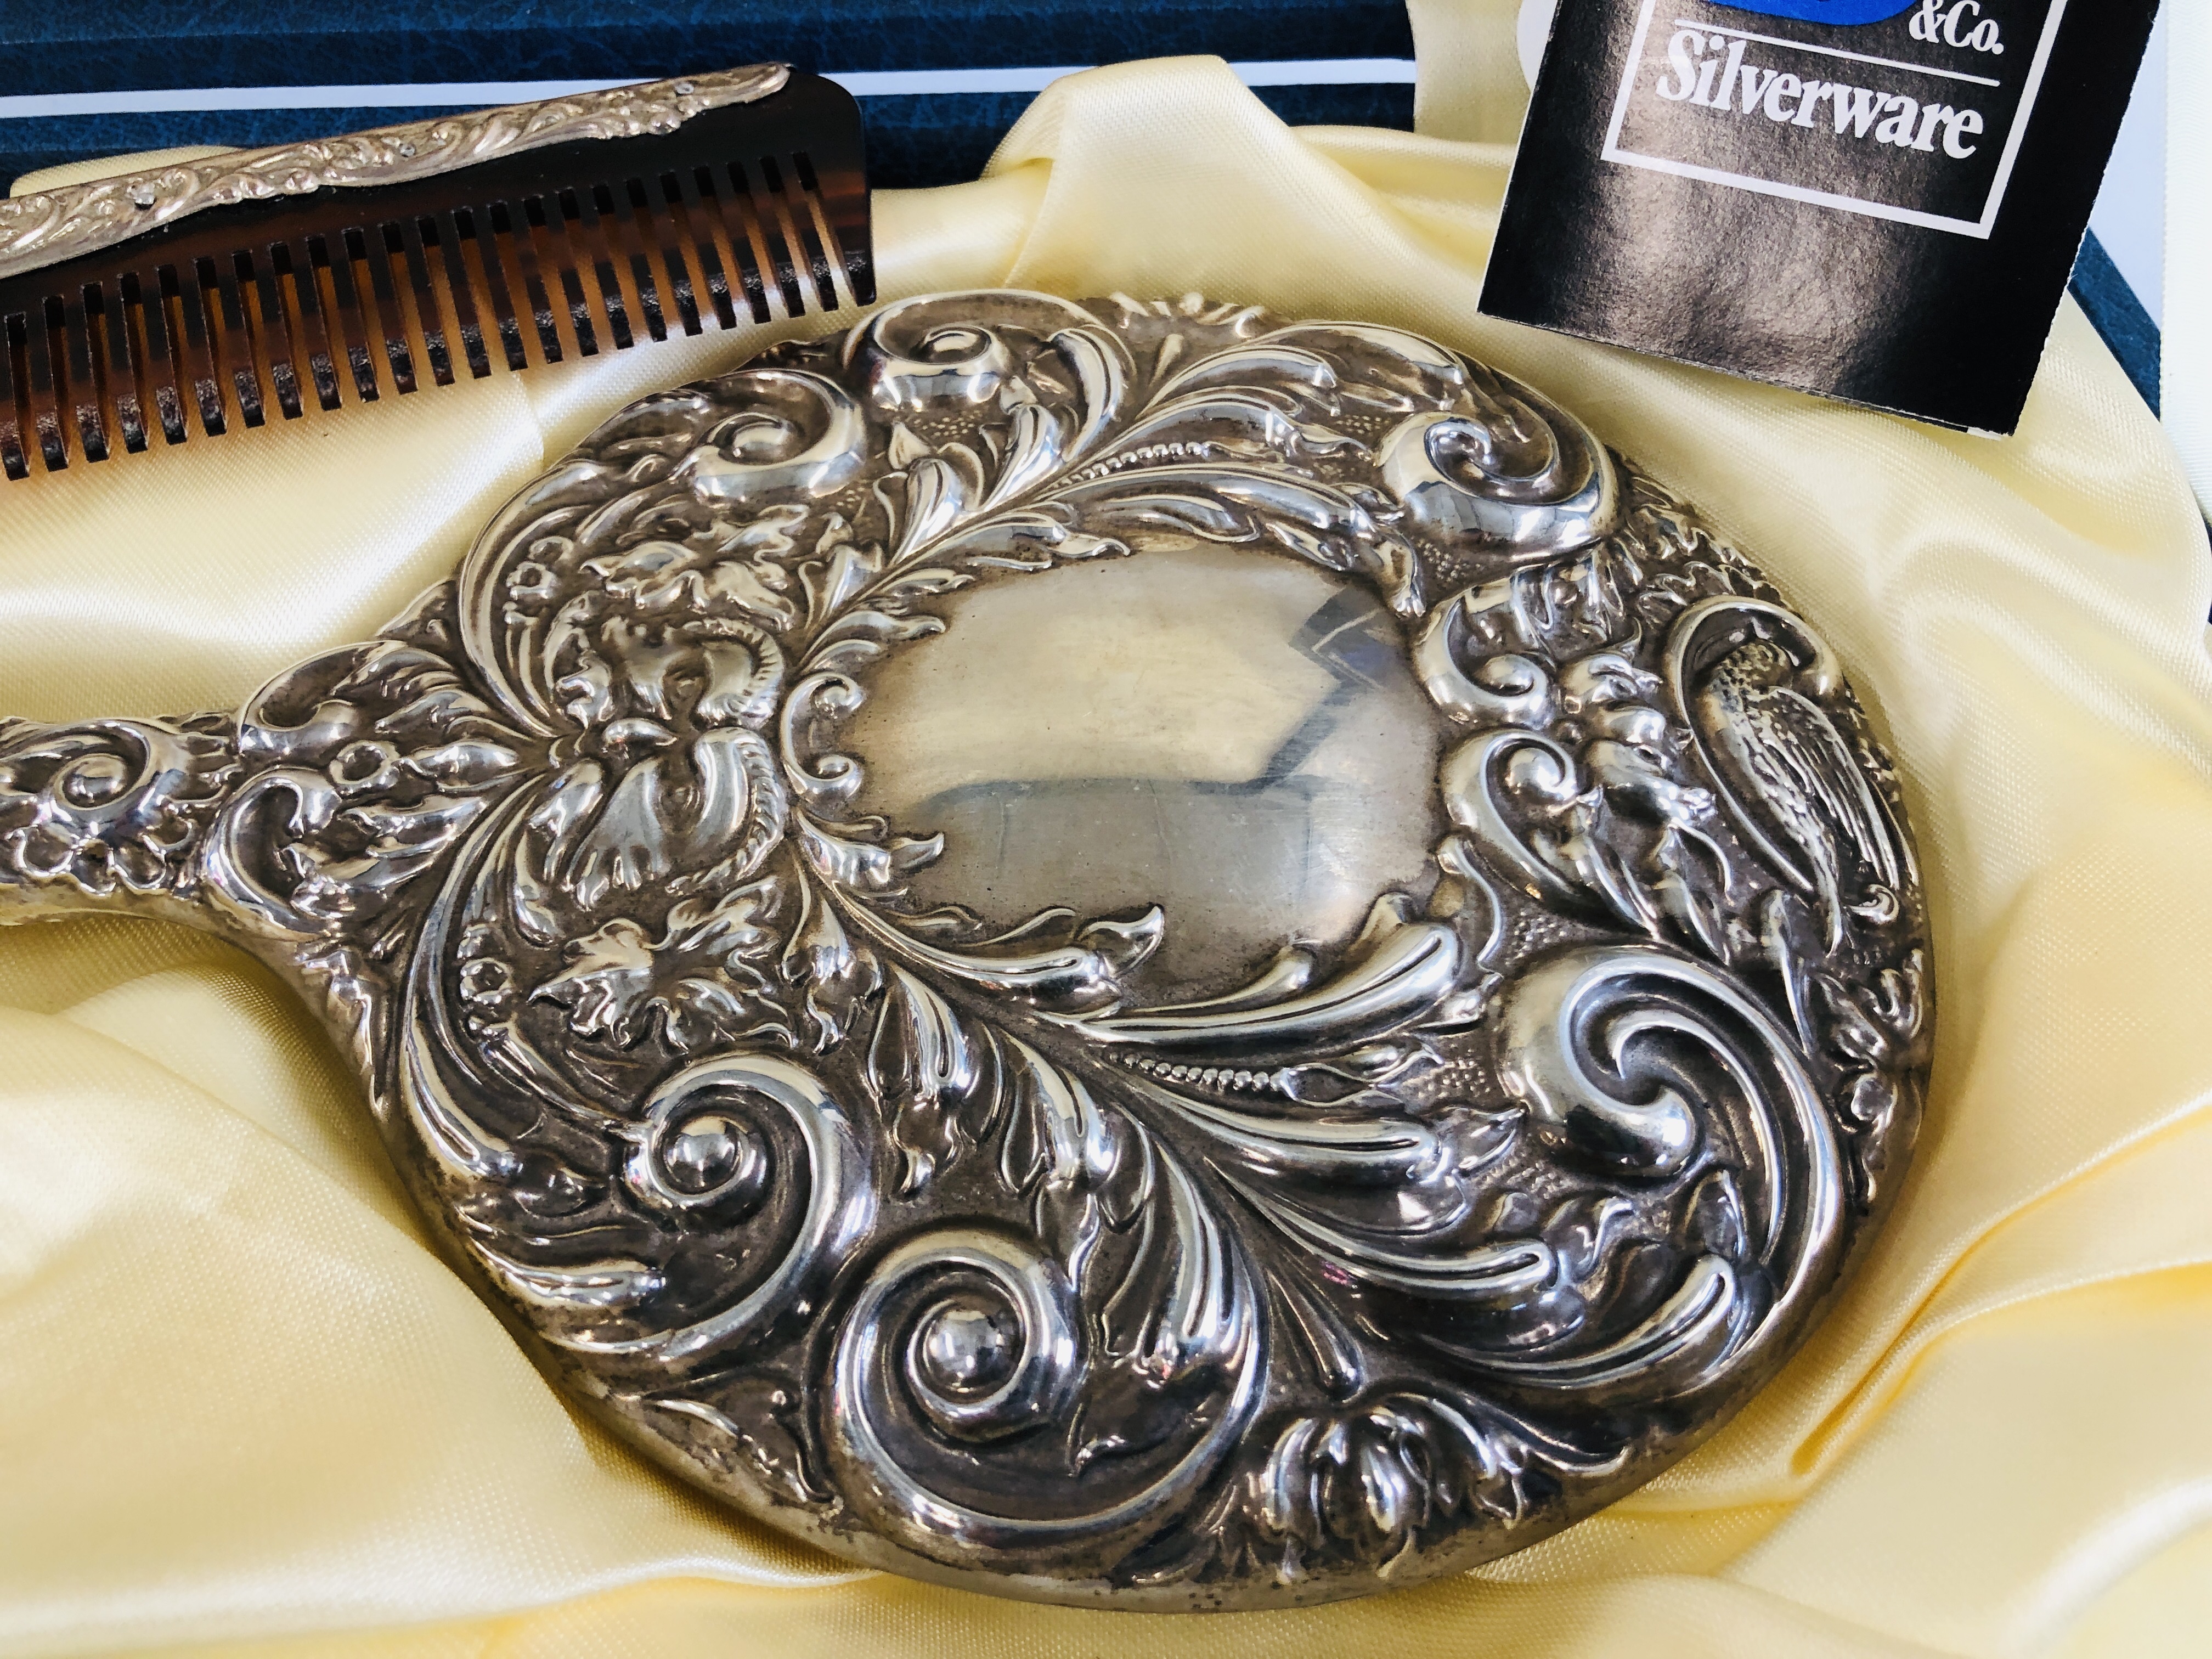 A VINTAGE 3 PIECE CASED SILVER BACKED BRUSH SET (COMPRISING MIRROR, BRUSH AND COMB). - Image 7 of 12